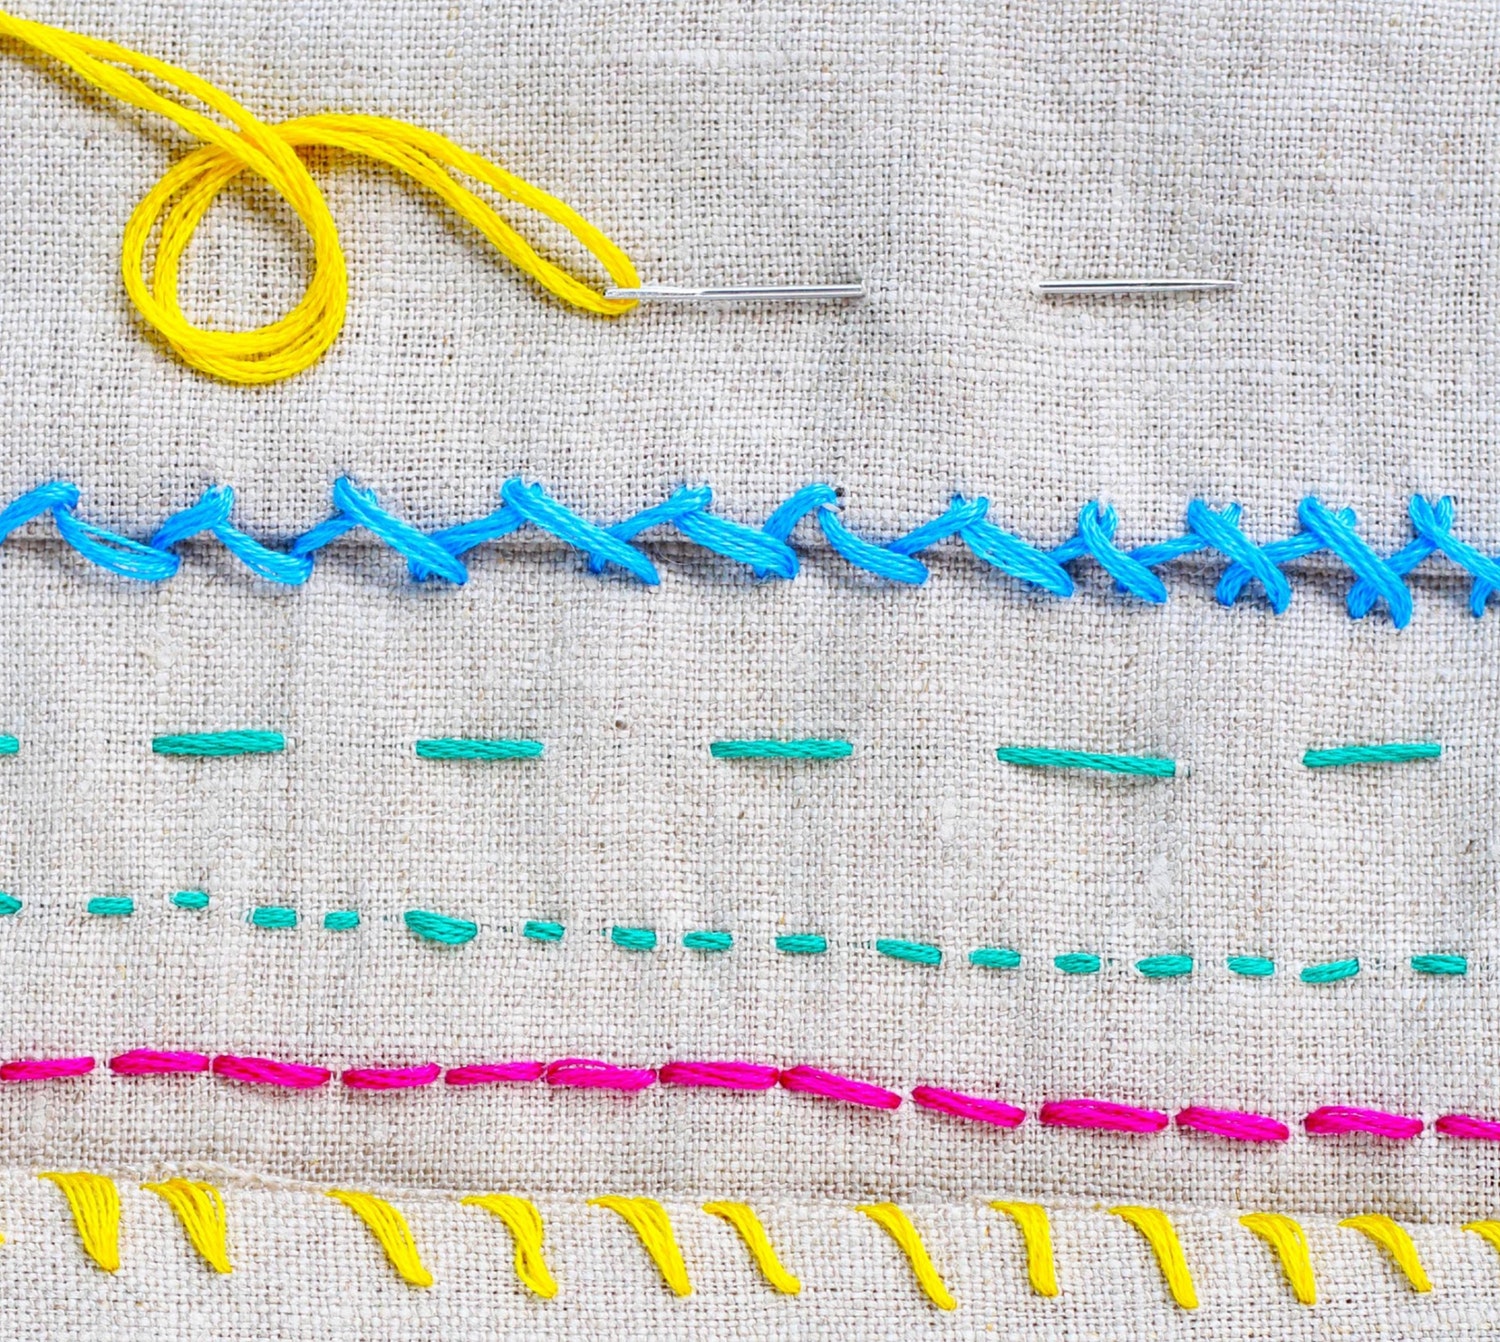 How to Hand Sew: 6 Basic Stitch Photo Tutorials | Apartment Therapy